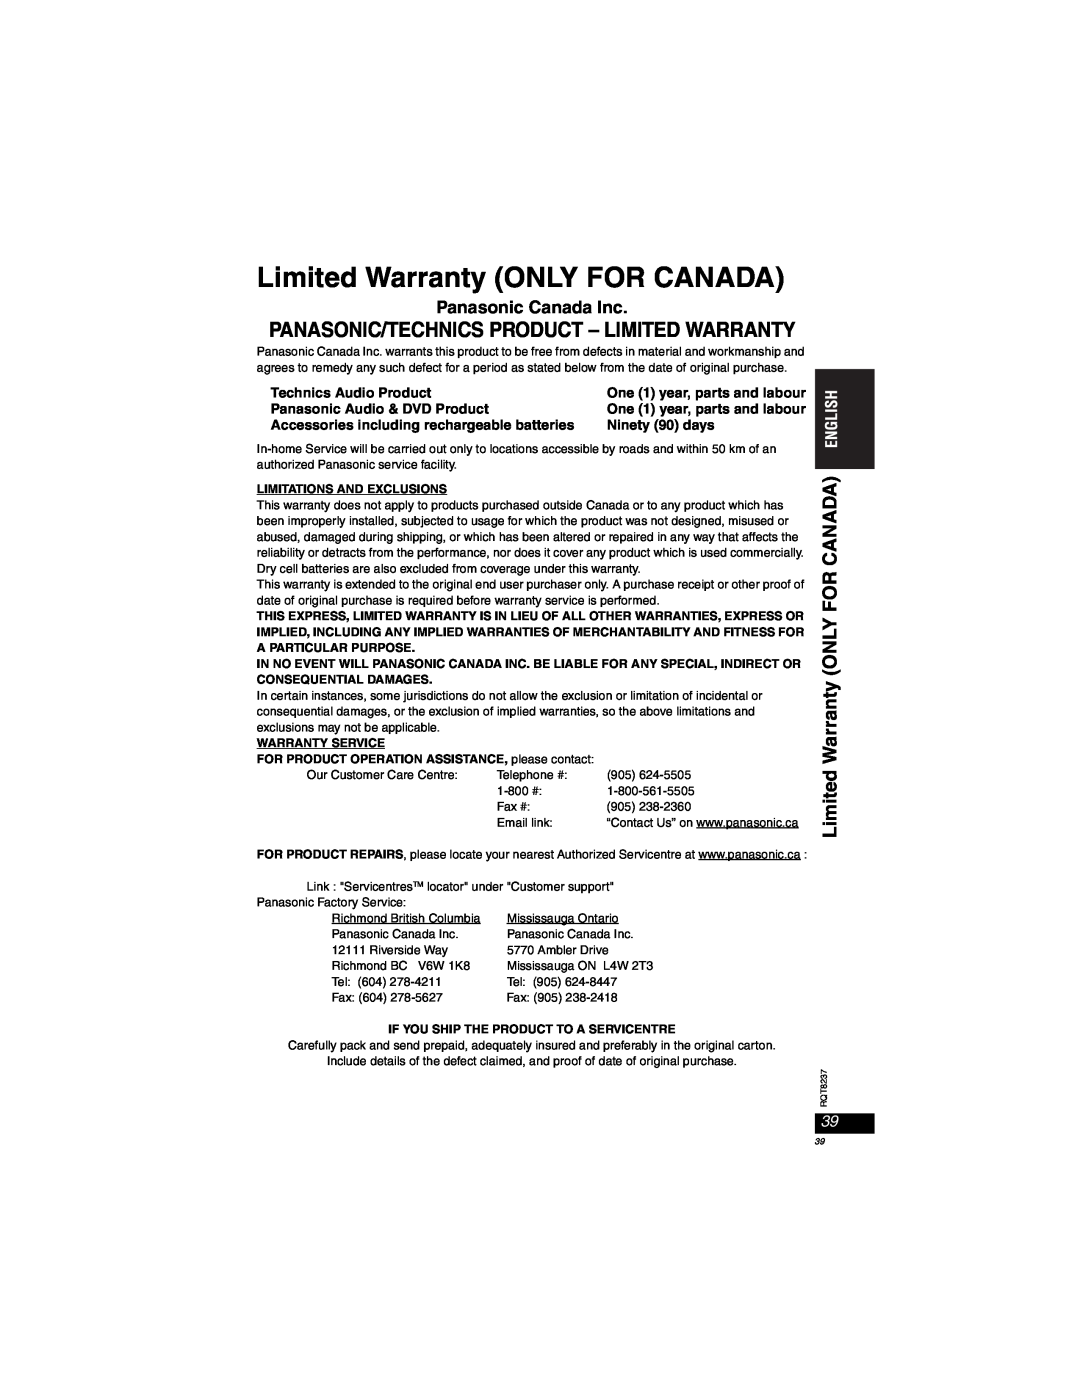 Panasonic DVD-LX97 Limited Warranty ONLY FOR CANADA, Panasonic/Technics Product - Limited Warranty, Technics Audio Product 